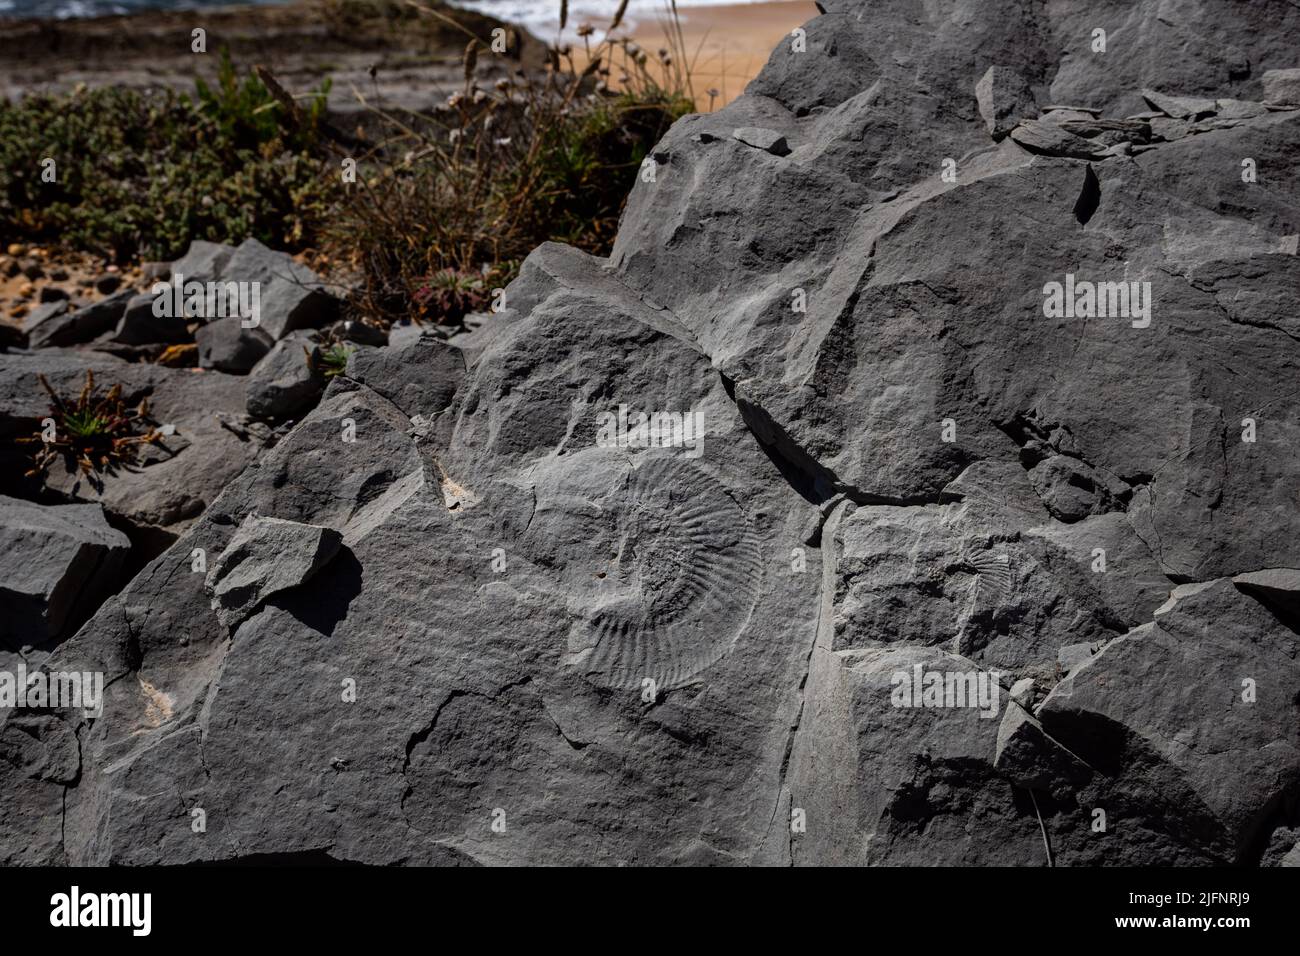 Detail of limestone rocks with remains of ammonite fossils in the Atlantic coast in Portugal Stock Photo